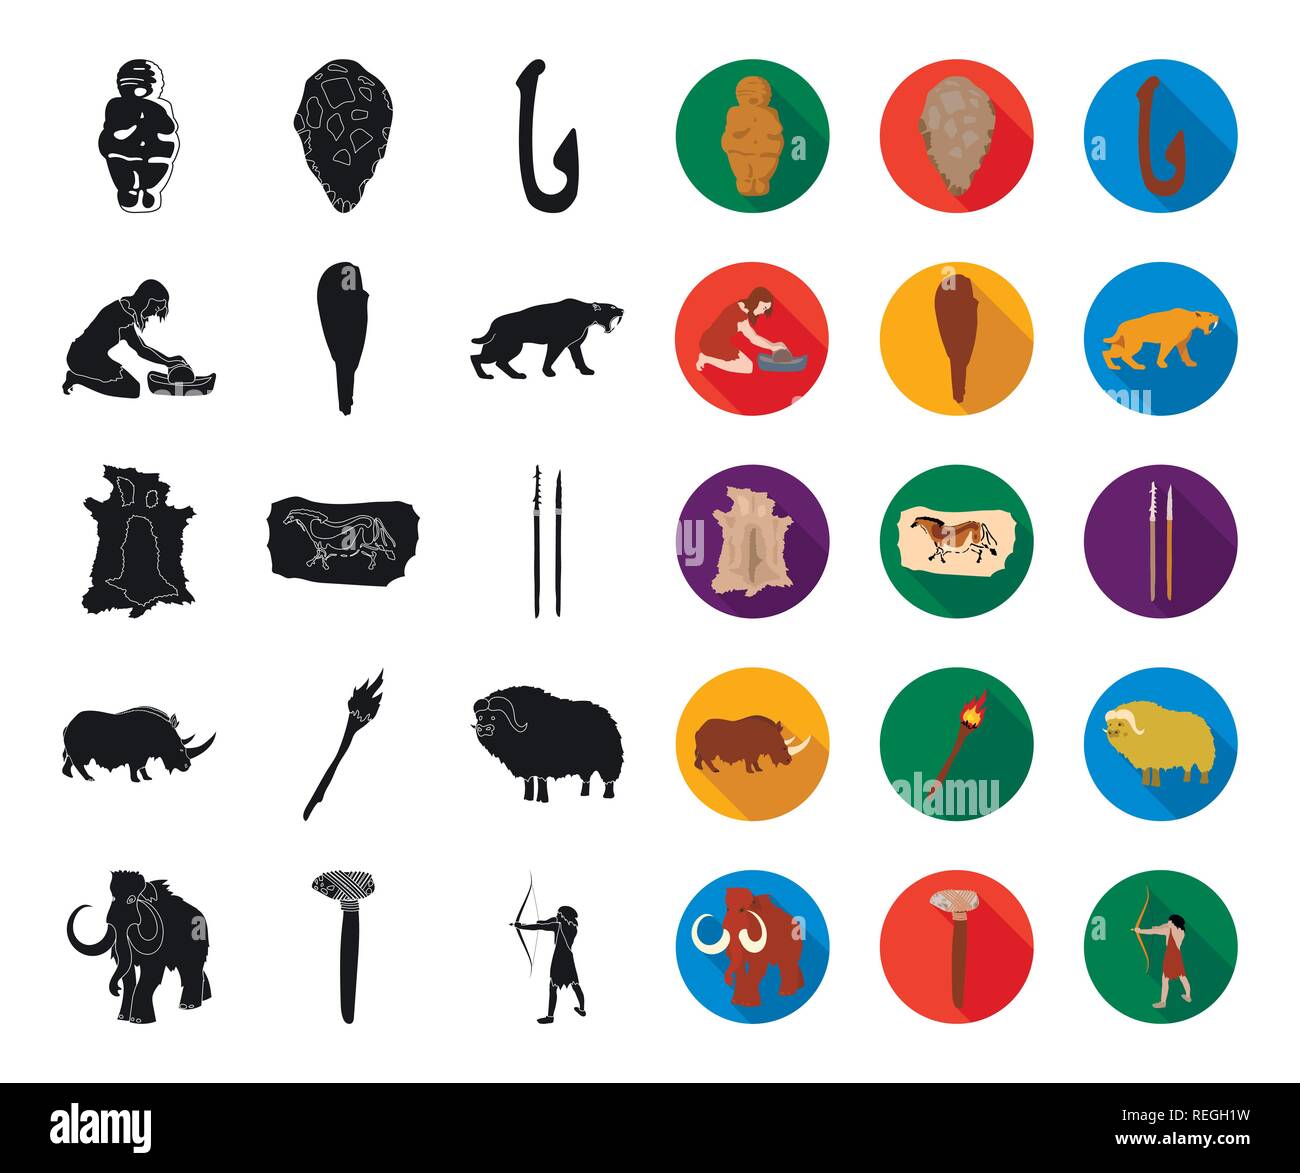 age,ancient,animal,antiquity,arrow,axe,beginning,black,flat,bone,bow,campfire,caveman,cavewoman,collection,culture,design,development,epoch,fauna,fish,grindstone,hide,hook,humanity,icon,illustration,isolated,life,logo,man,muskox,painting,people,period,rhinoceros,saber-toothed,set,sign,spears,stone,survival,symbol,tiger,tool,torch,truncheon,vector,venus,web,woolly mammoth Vector Vectors , Stock Vector